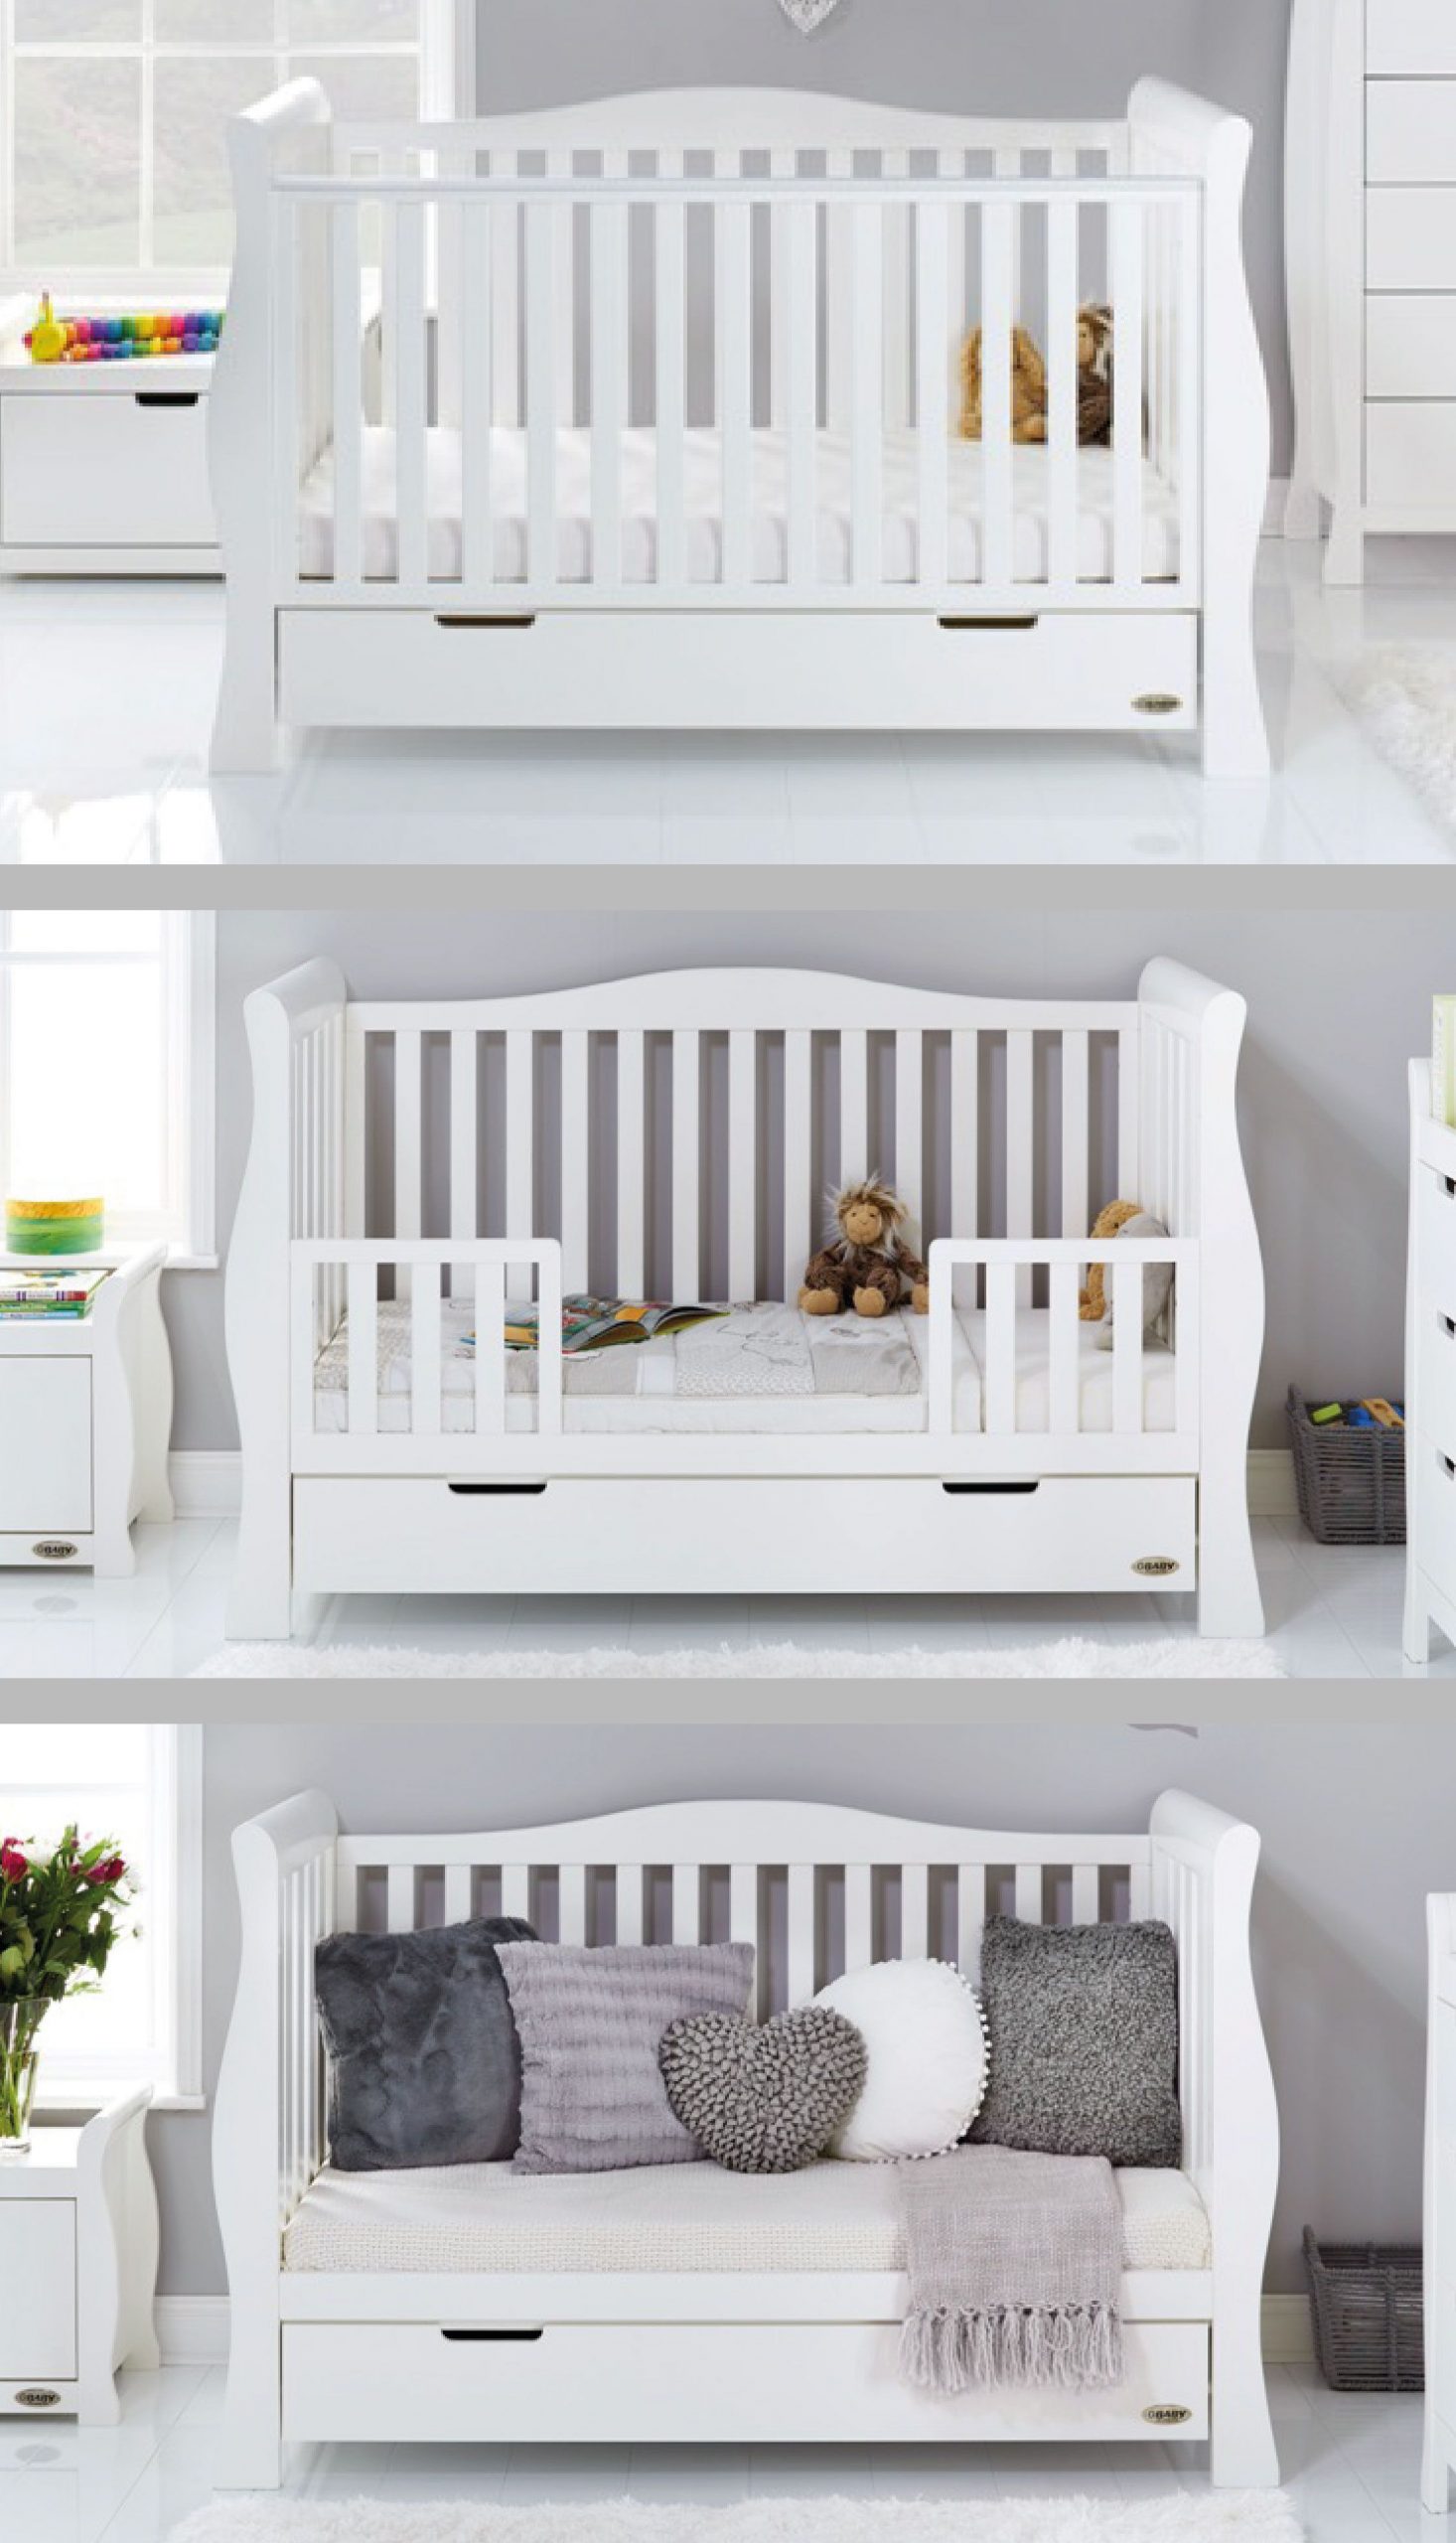 Obaby Stamford Luxe Sleigh Cot Bed – White  . . . #baby #nursery #babynursery #c…